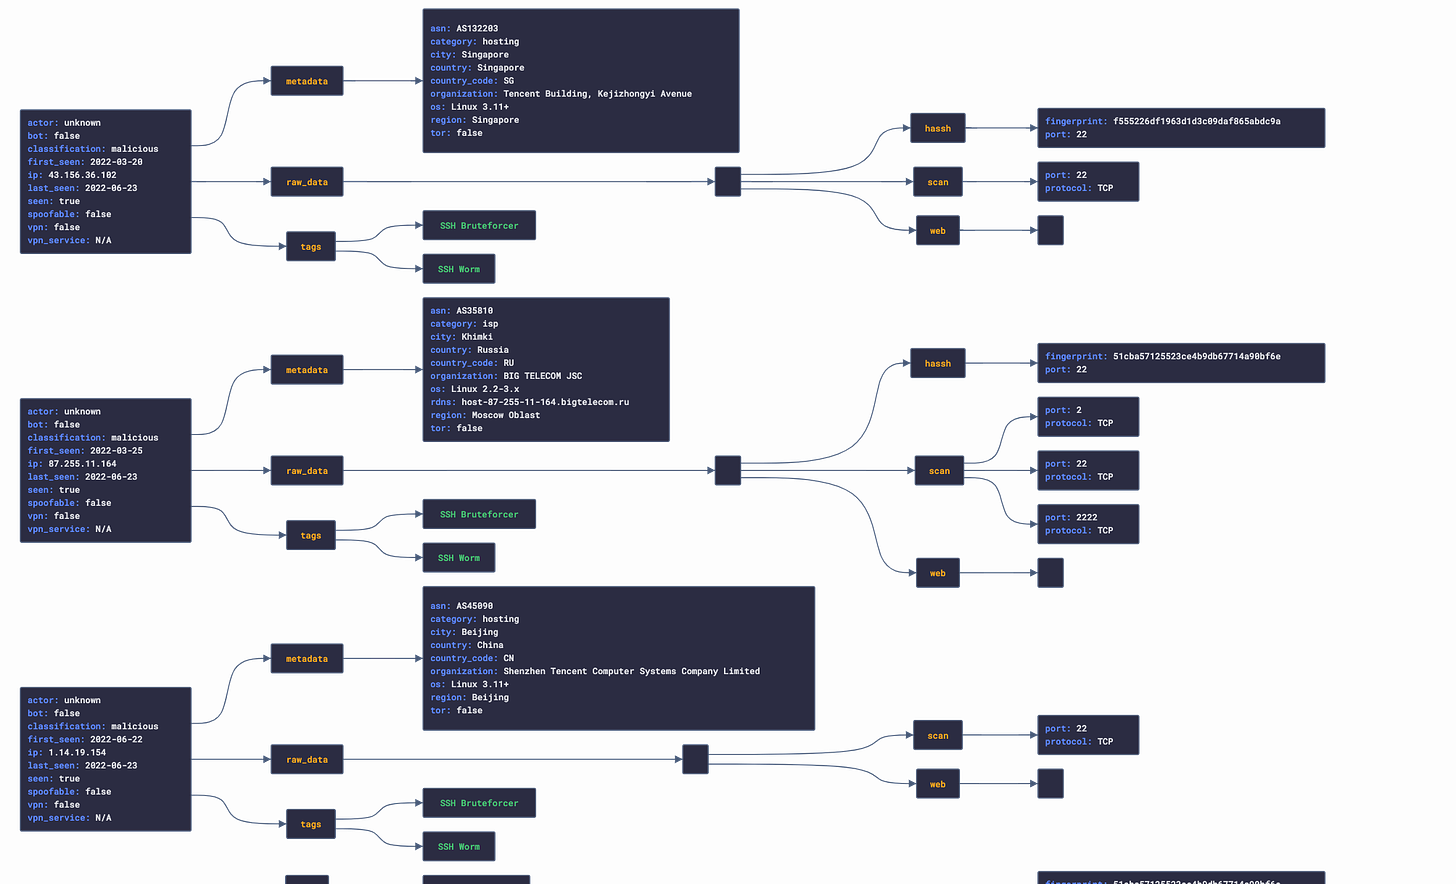 json visio graph of some greynoise data